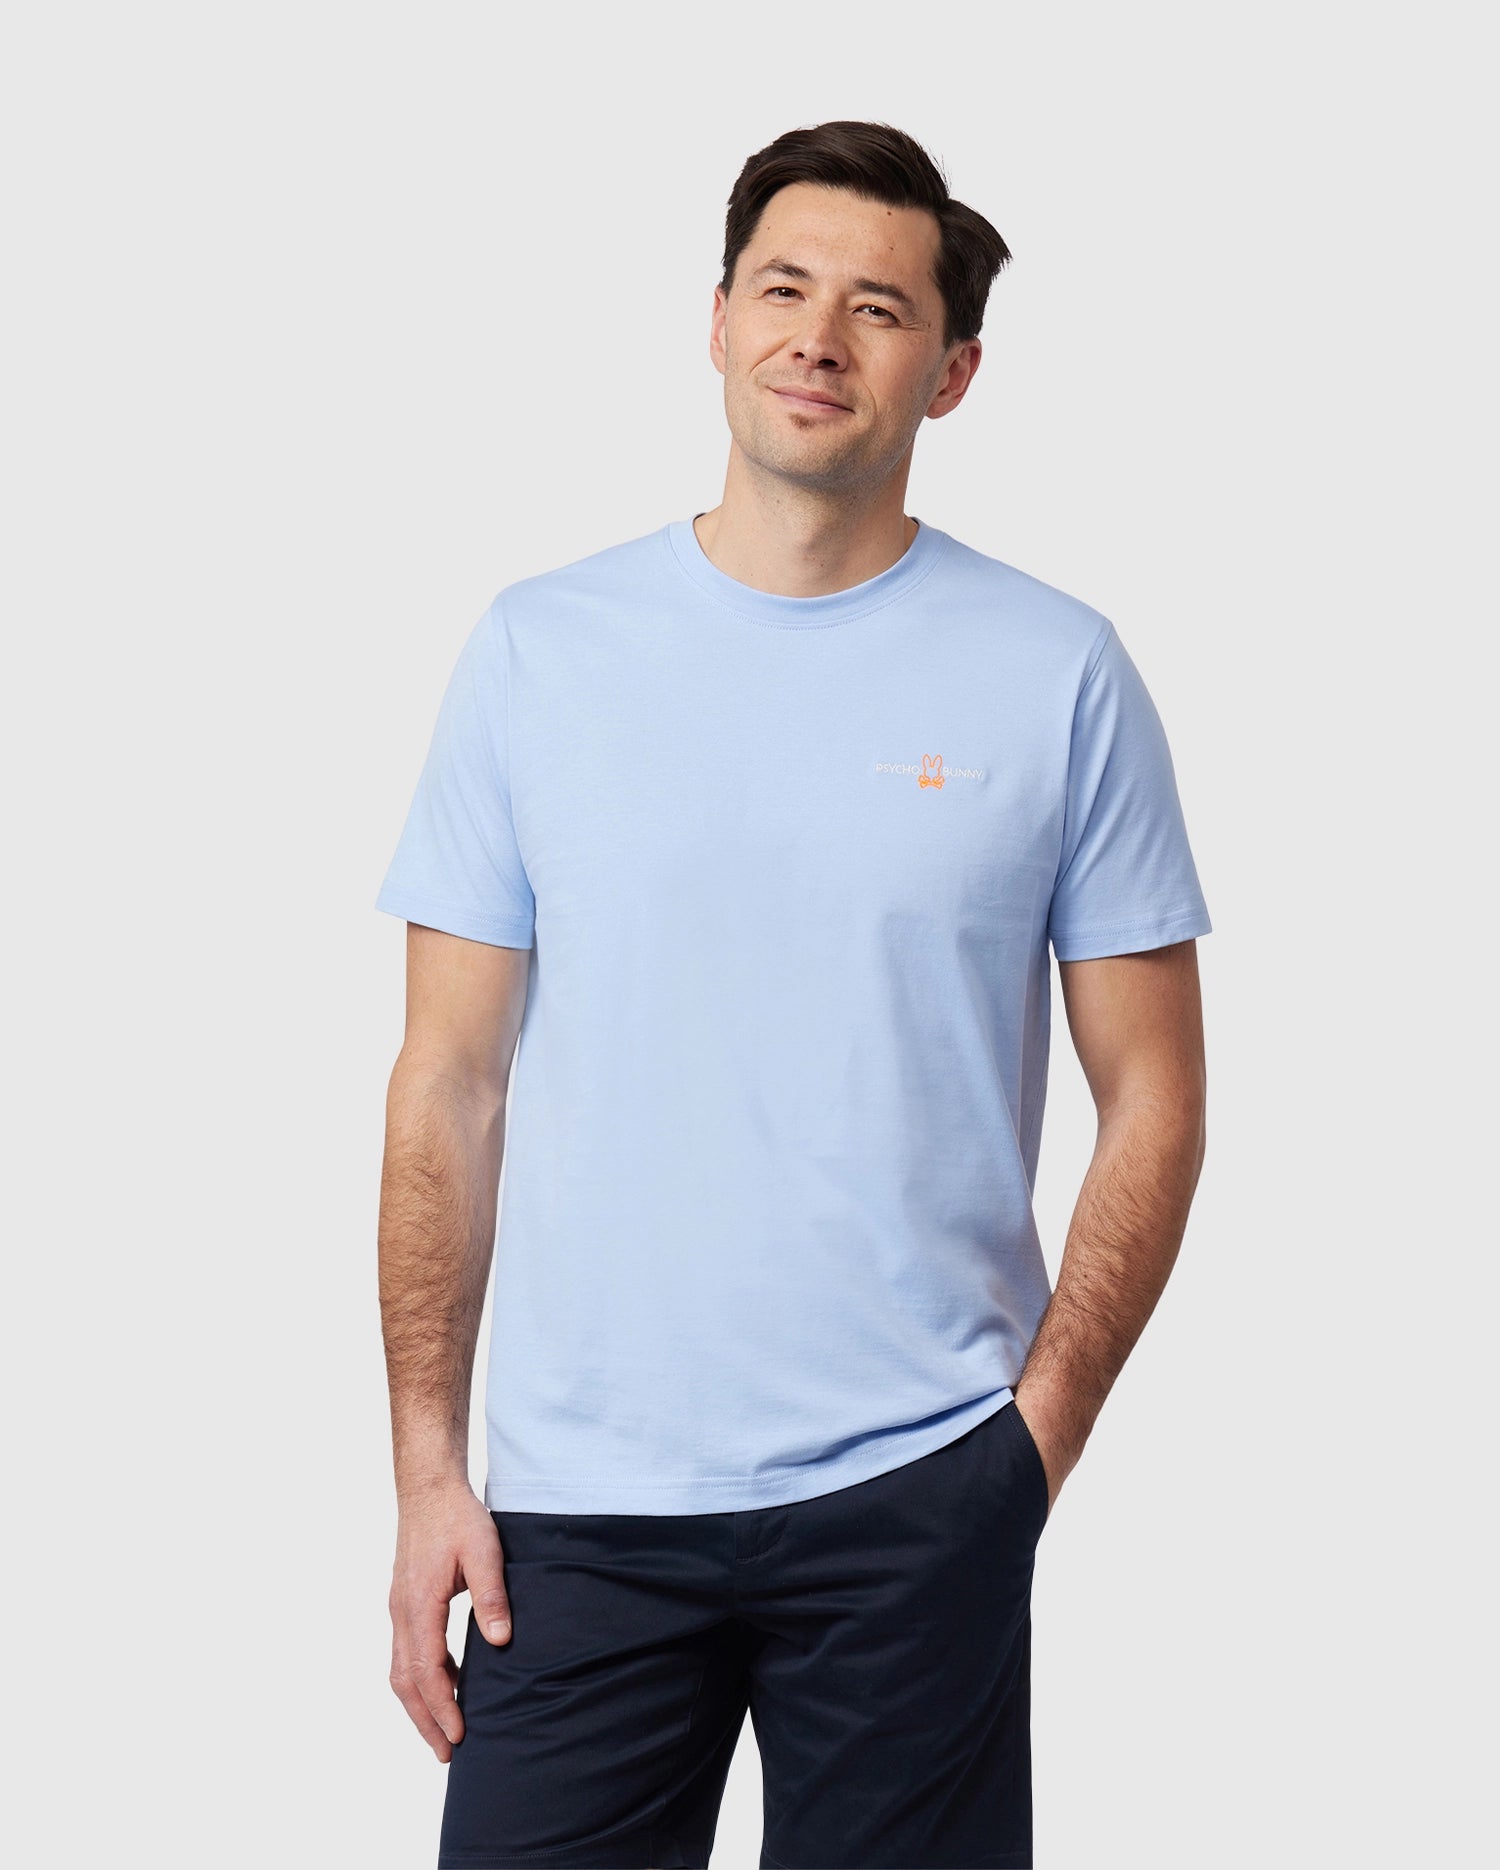 A man with short dark hair is standing against a plain background, wearing a light blue Psycho Bunny MENS WASTERLO BACK GRAPHIC TEE - B6U317B2TS made from Peruvian Pima cotton and dark pants. He has one hand in his pocket and is smiling gently, looking straight ahead.